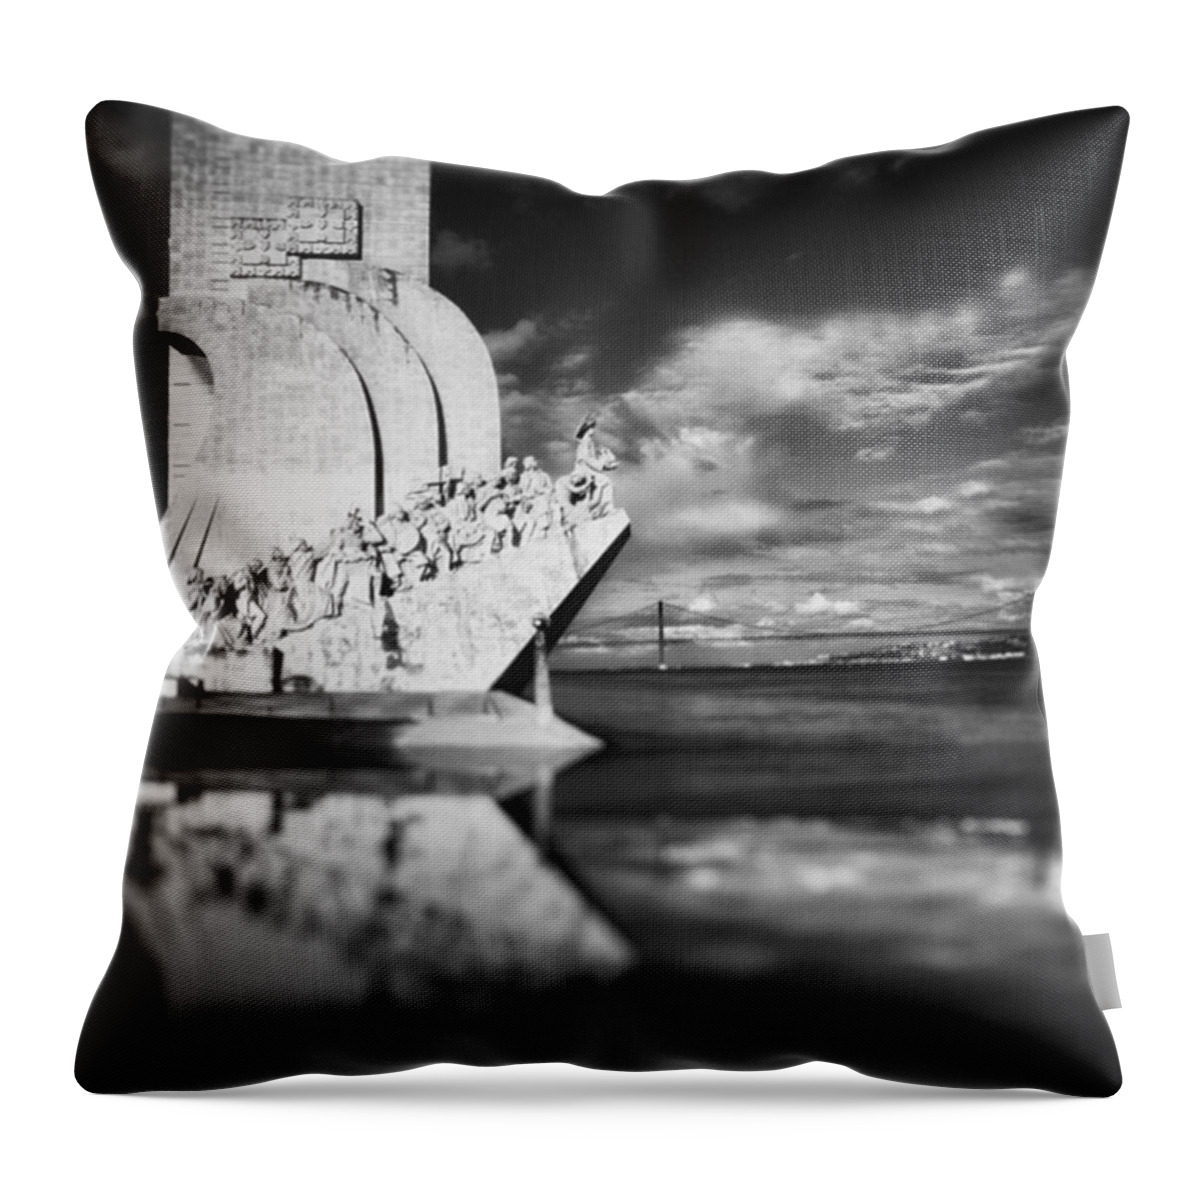 Bnw_society Throw Pillow featuring the photograph A Little Bit Of Portugal by Jorge Ferreira